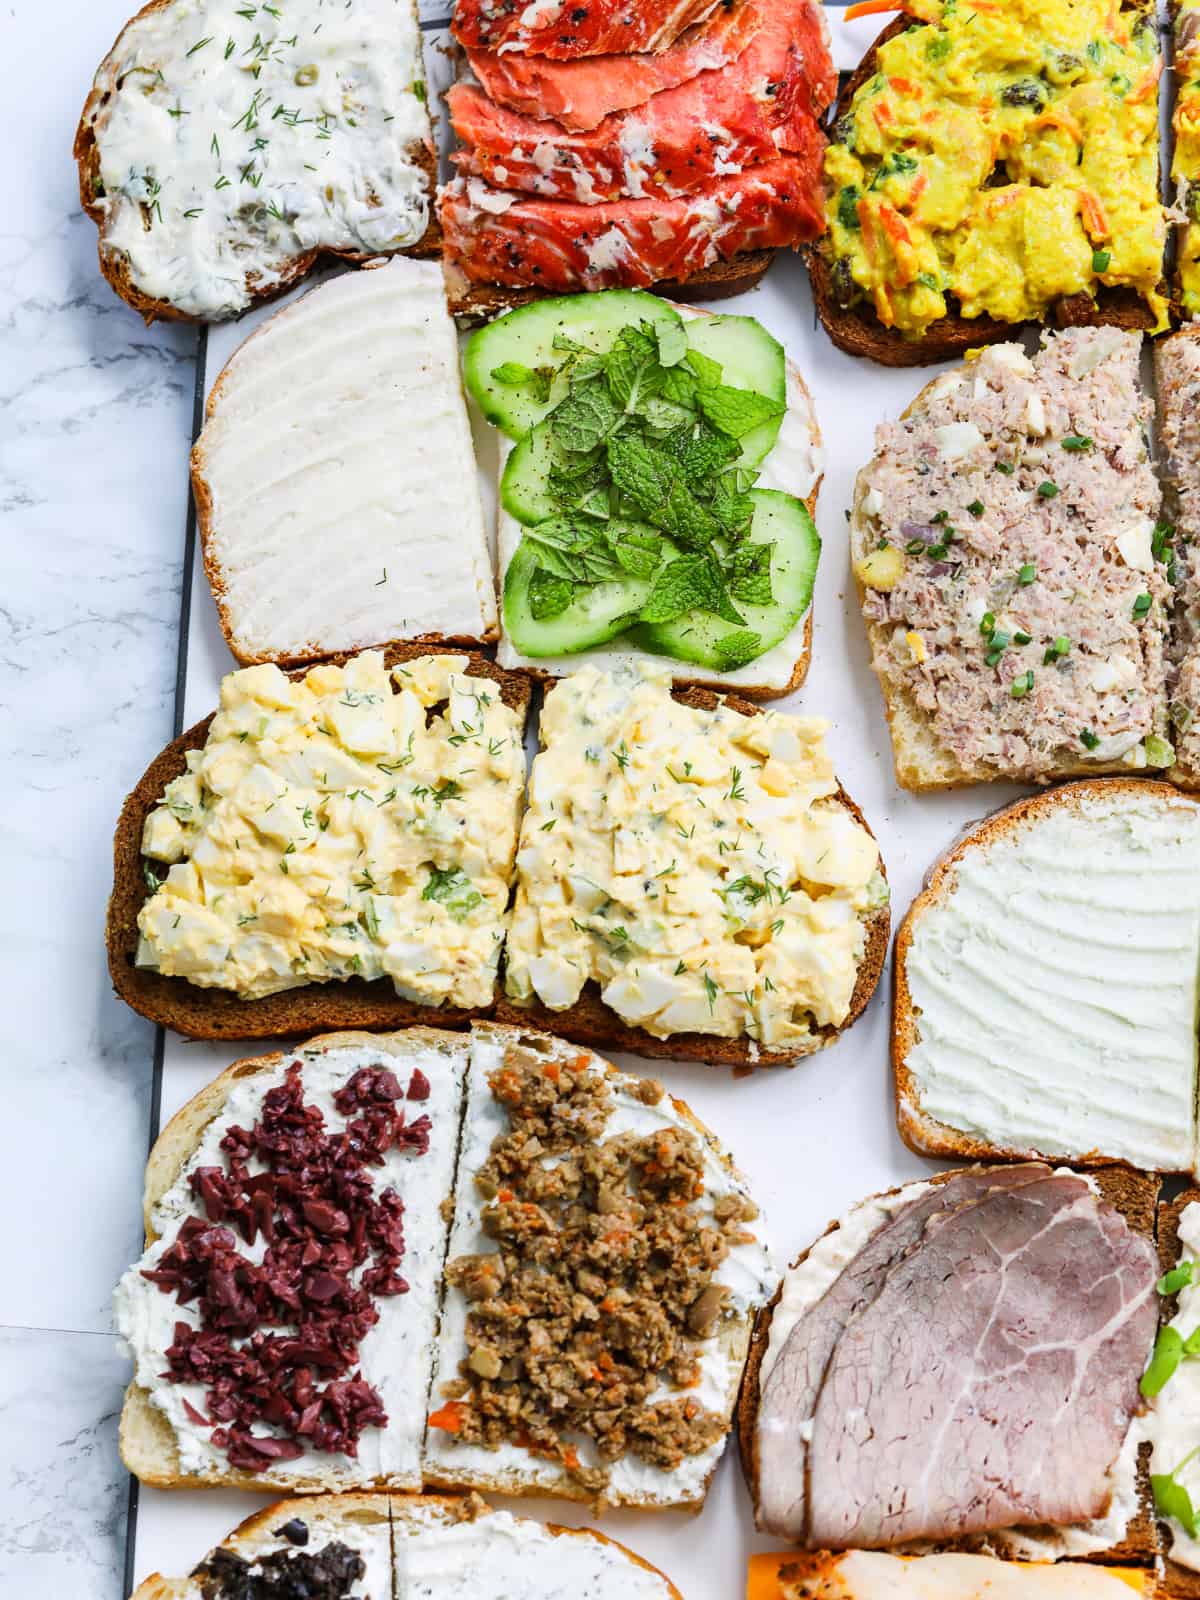 https://www.delicioustable.com/wp-content/uploads/2023/05/Making-sandwiches-including-egg-salad.jpg